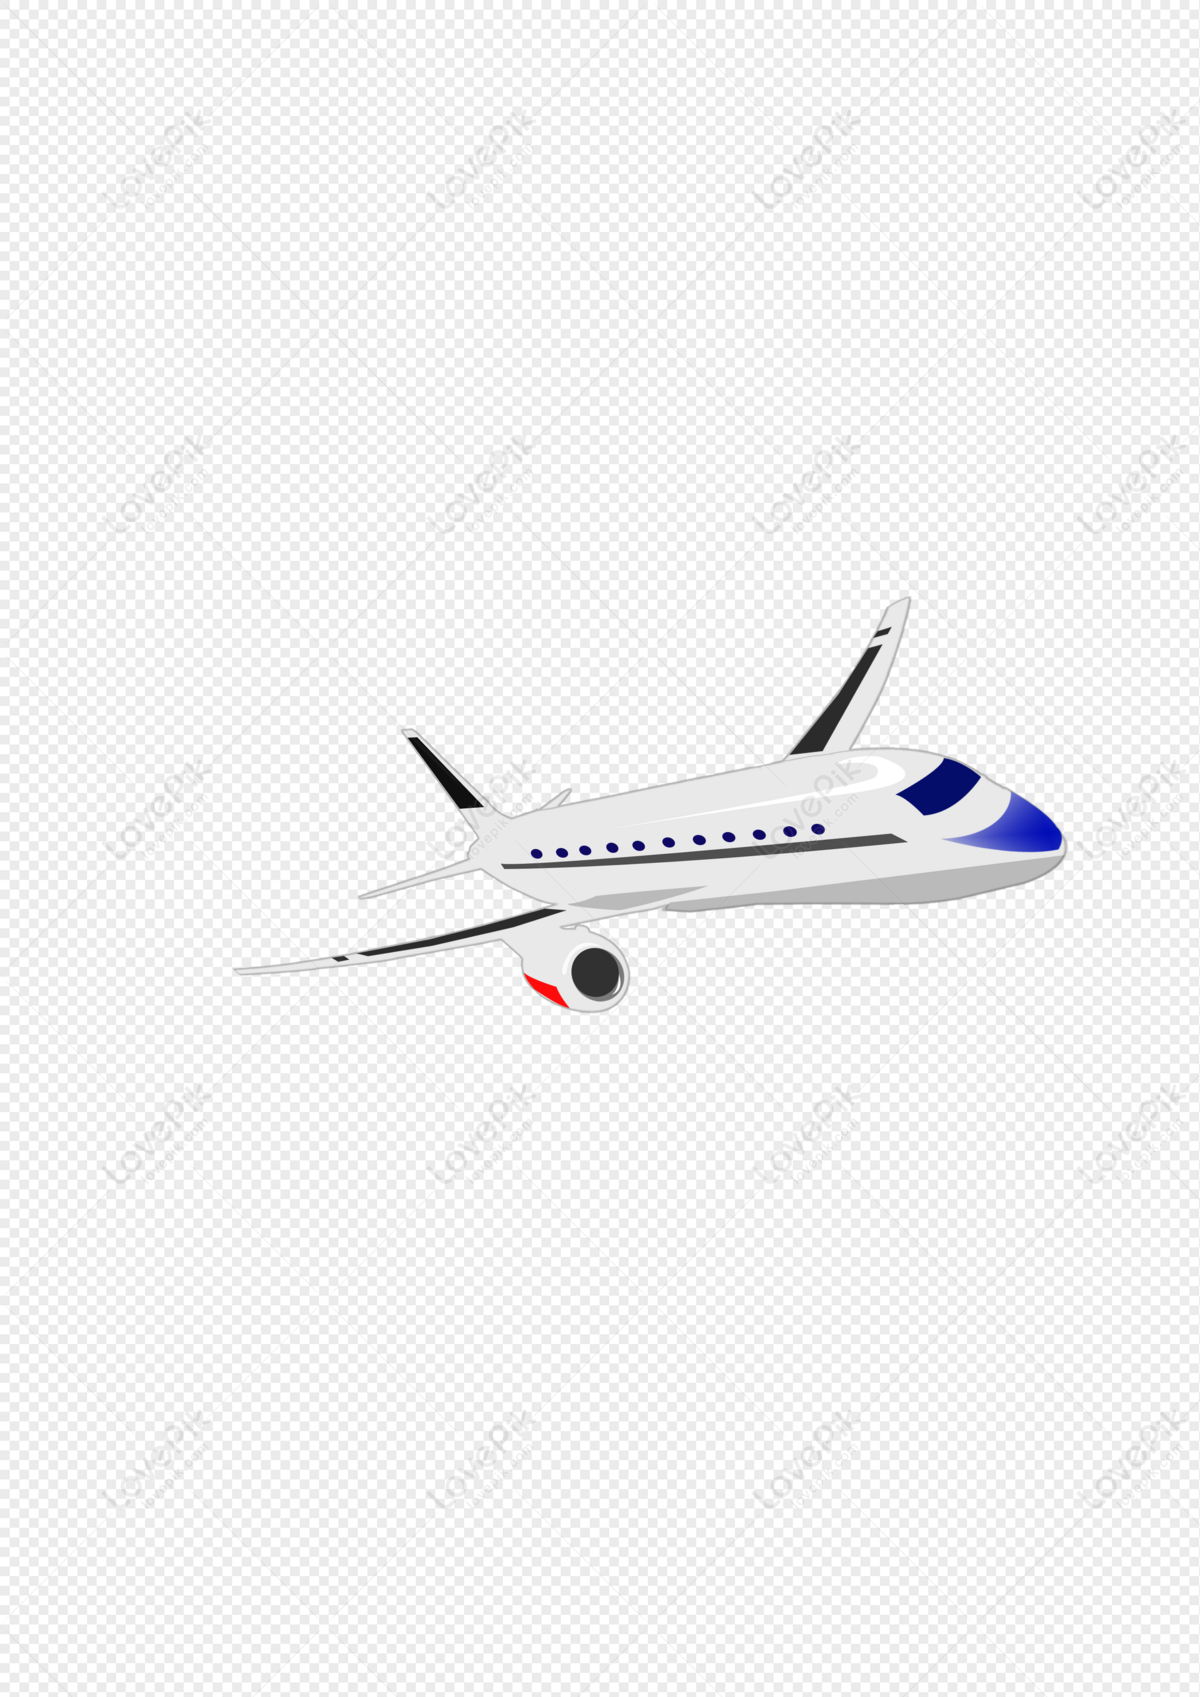 Hand Painted Cartoon Small Fresh Plane Flying Free PNG Image And Clipart  Image For Free Download - Lovepik | 401556938